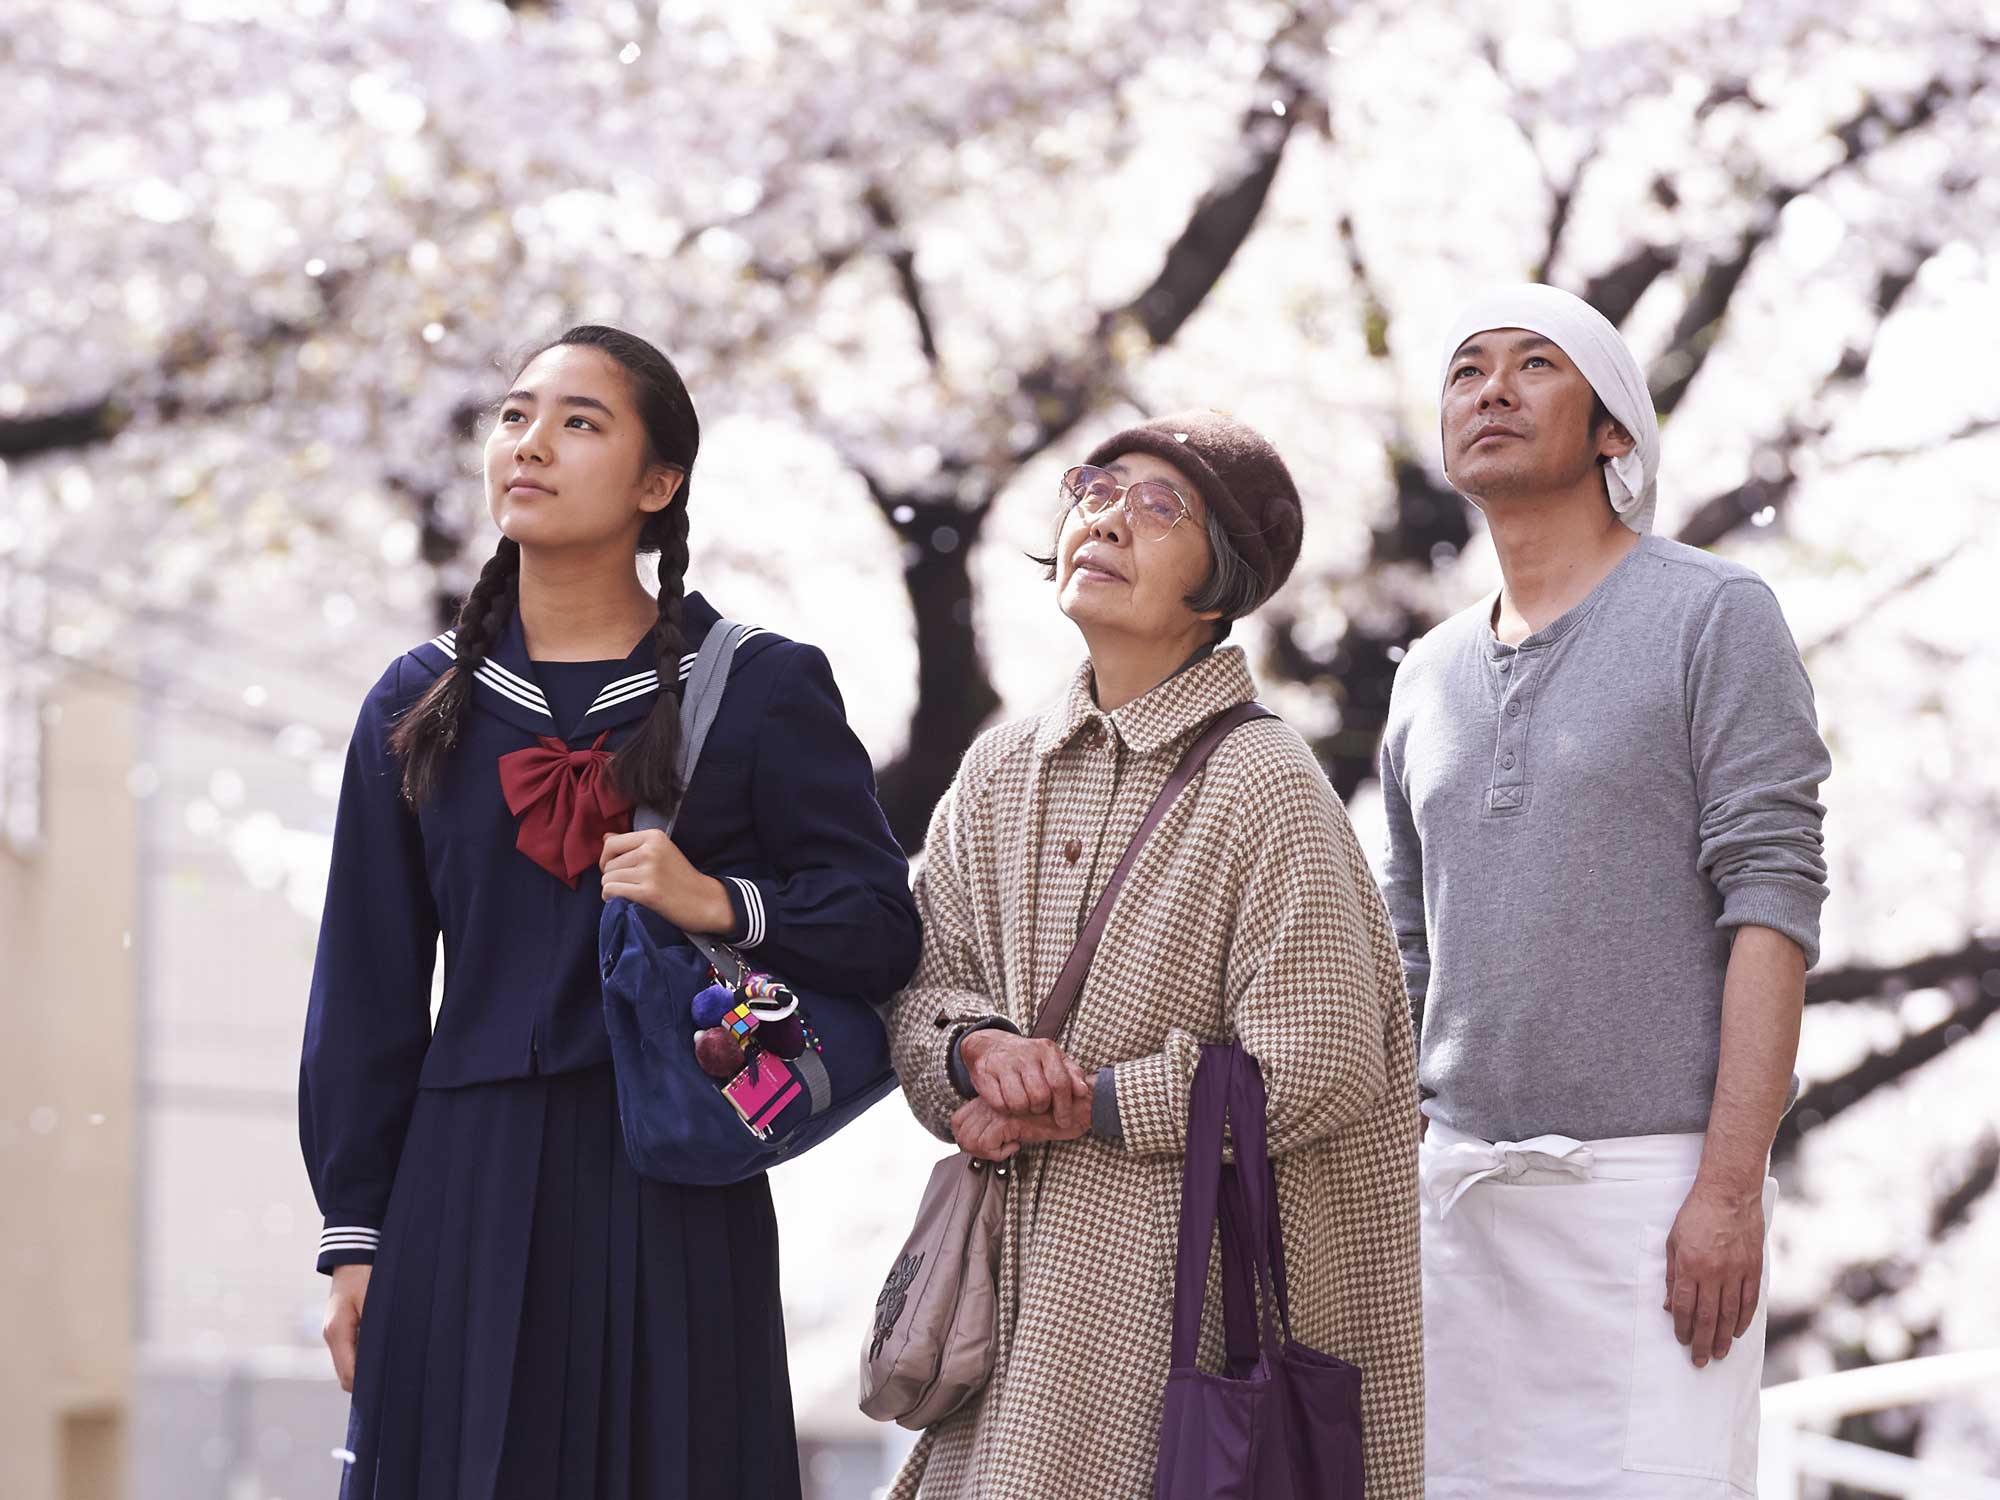 Image is from the film 'Sweet Bean' (2015). A school girl, an old woman, and a man all stand together and watch cherry blossoms fall from their branches.